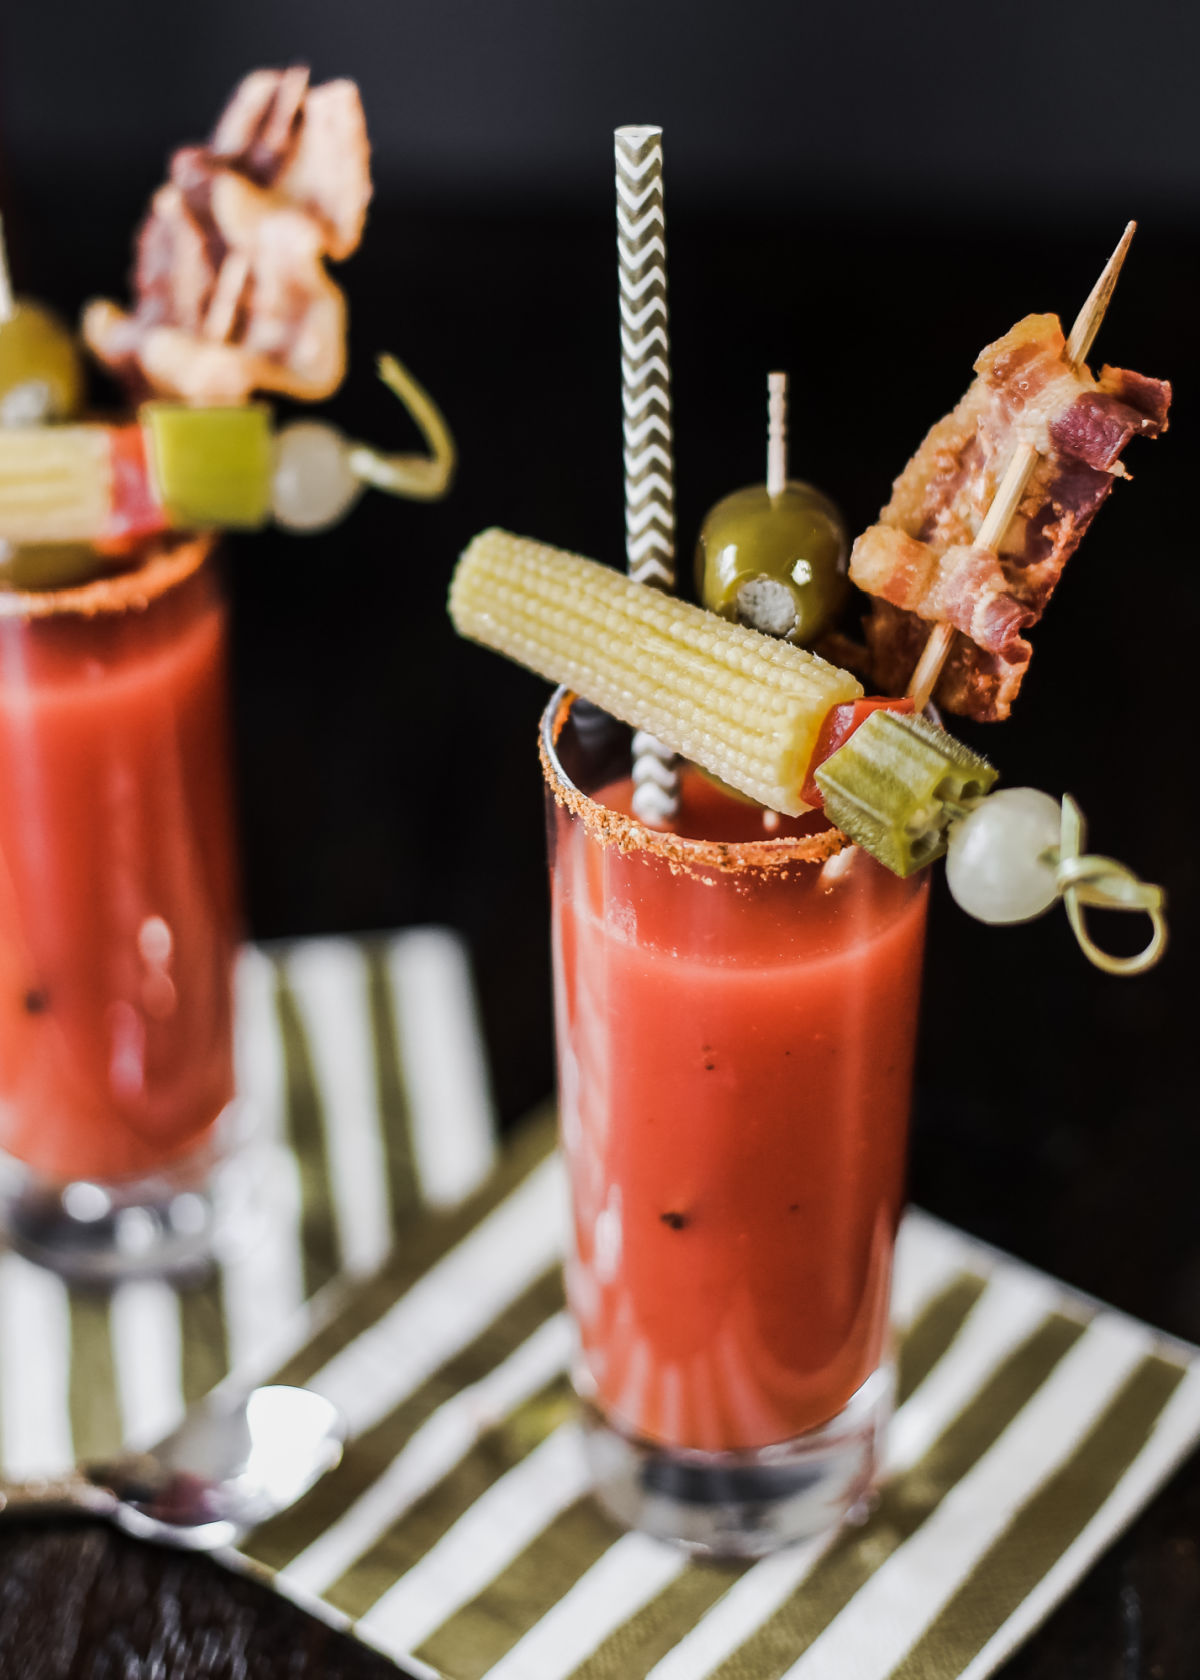 two bloody marys with garnishes, sitting on stripe napkins.